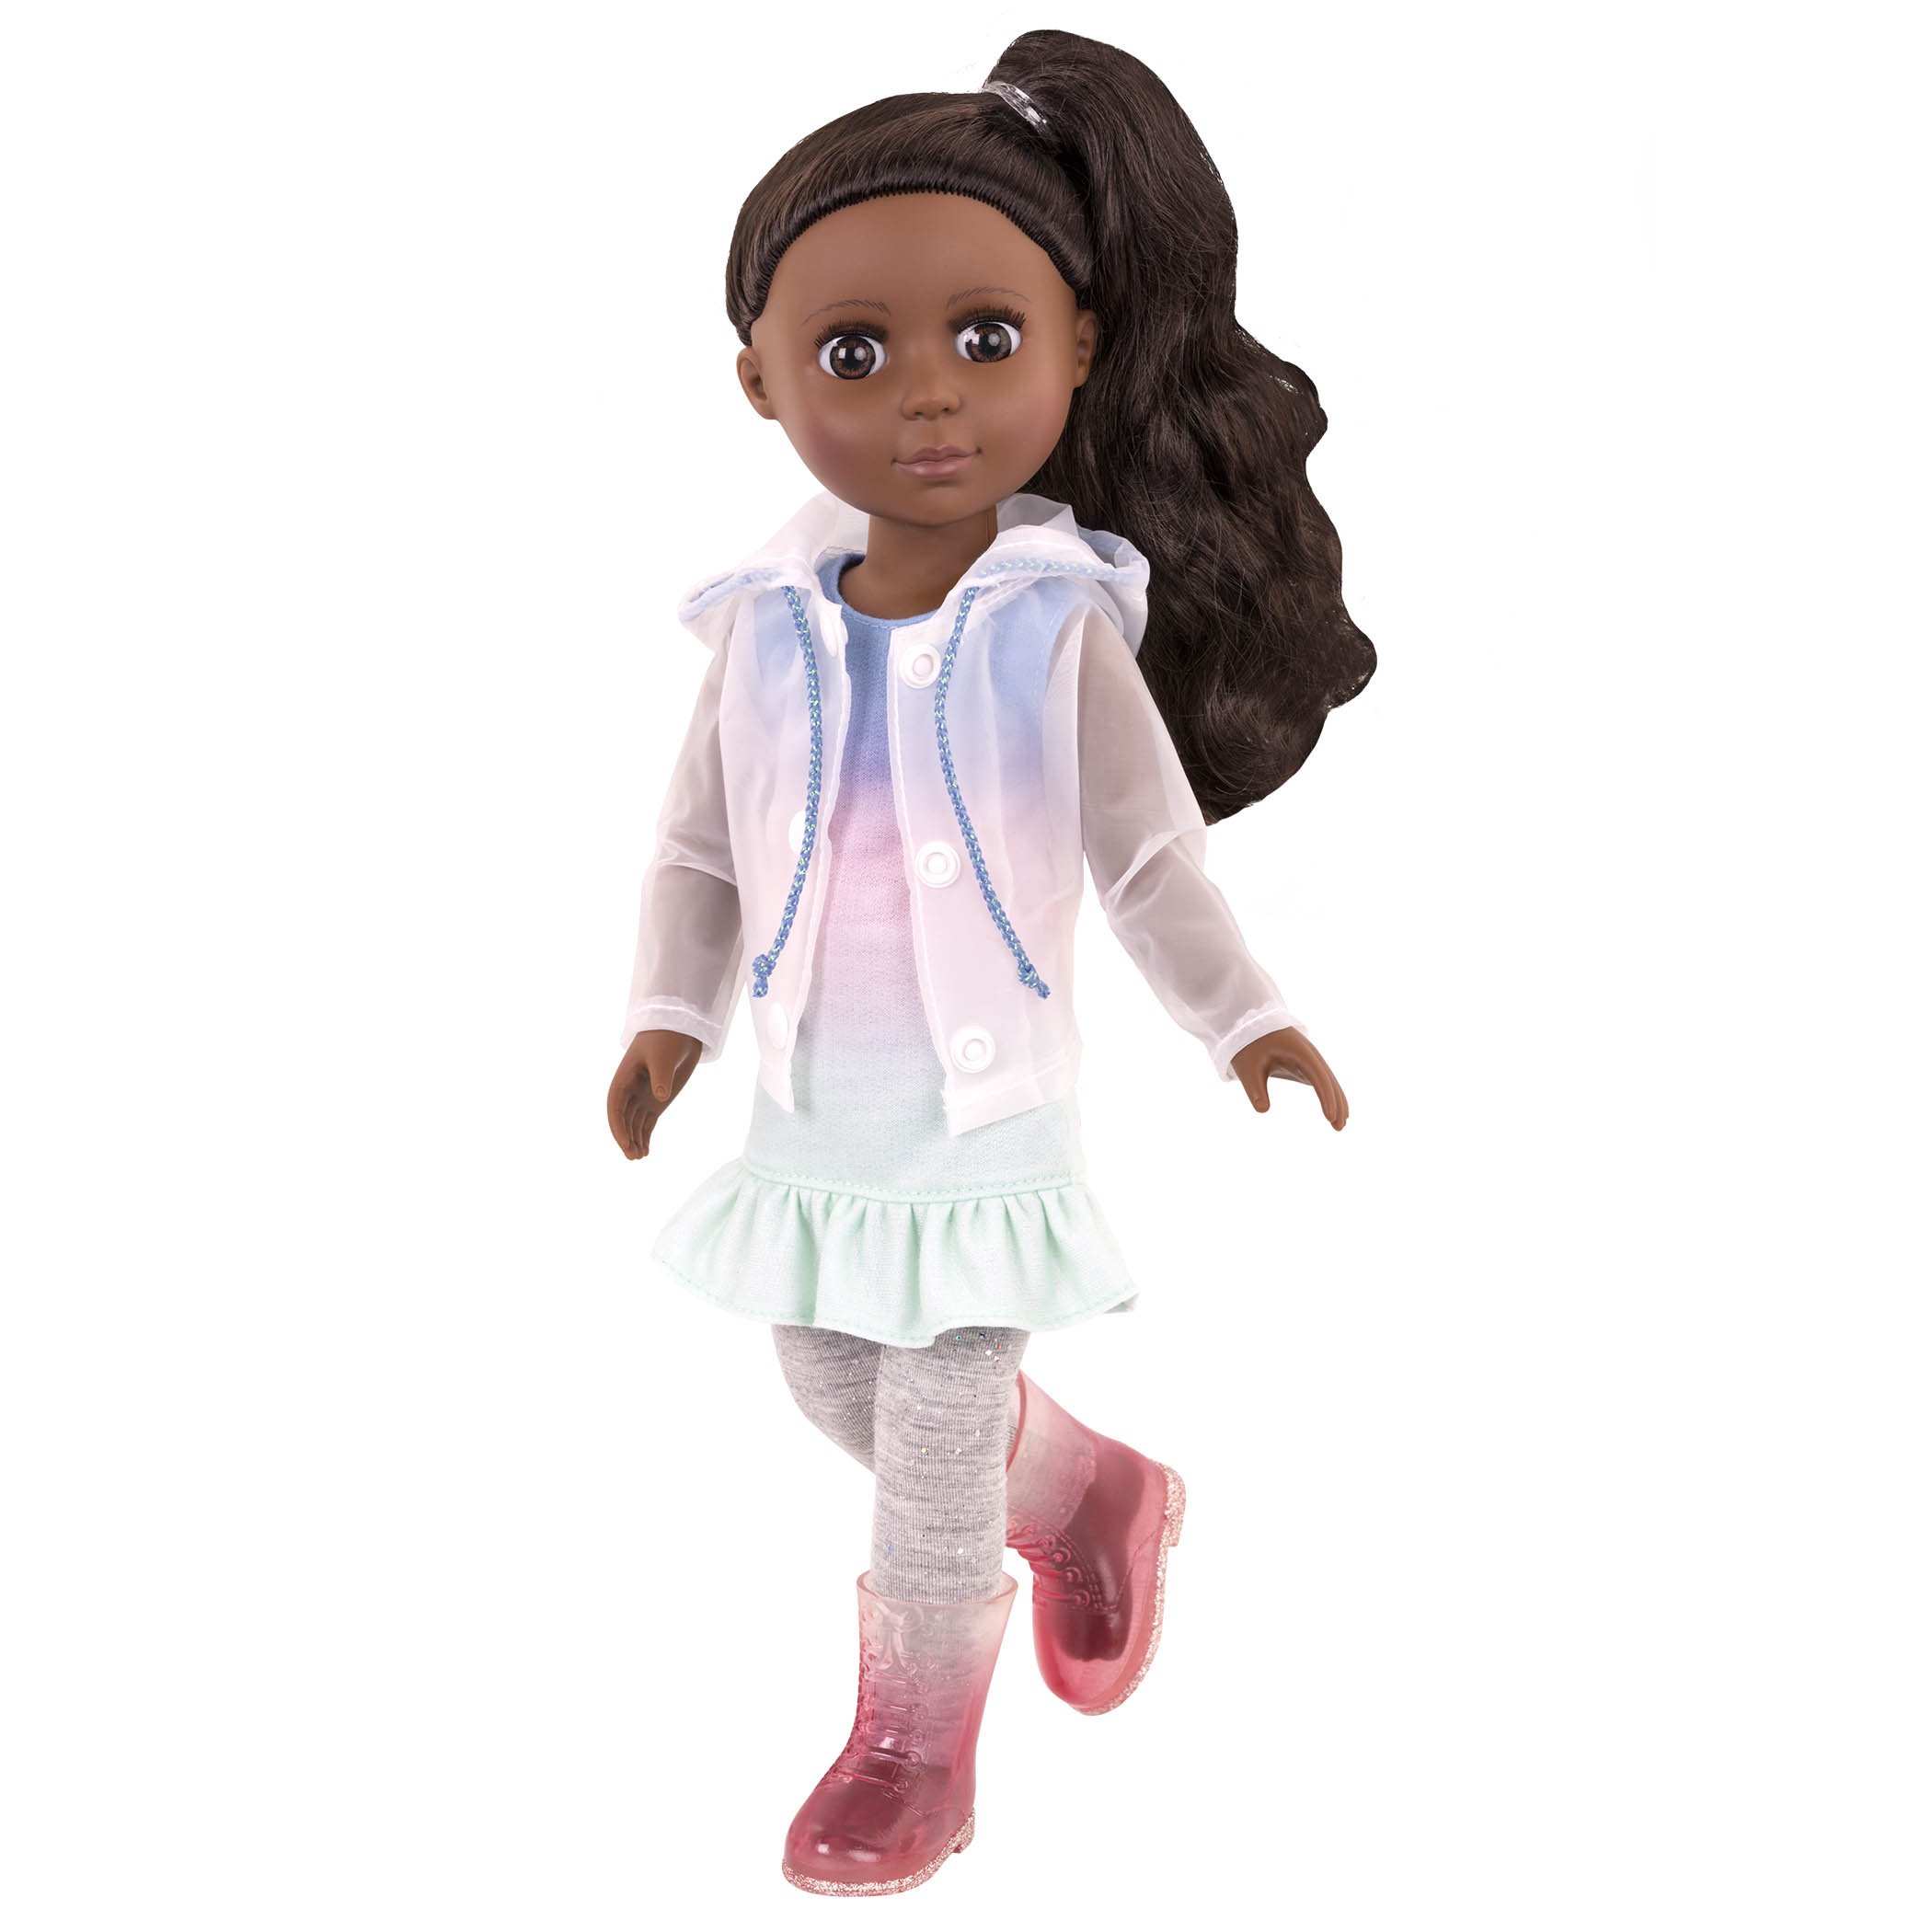 Glitter Girls - Revealing Our Shine Outfit -14-inch Doll Clothes– Toys, Clothes & Accessories For Girls 3-Year-Old & Up, includes Windbreaker (1)